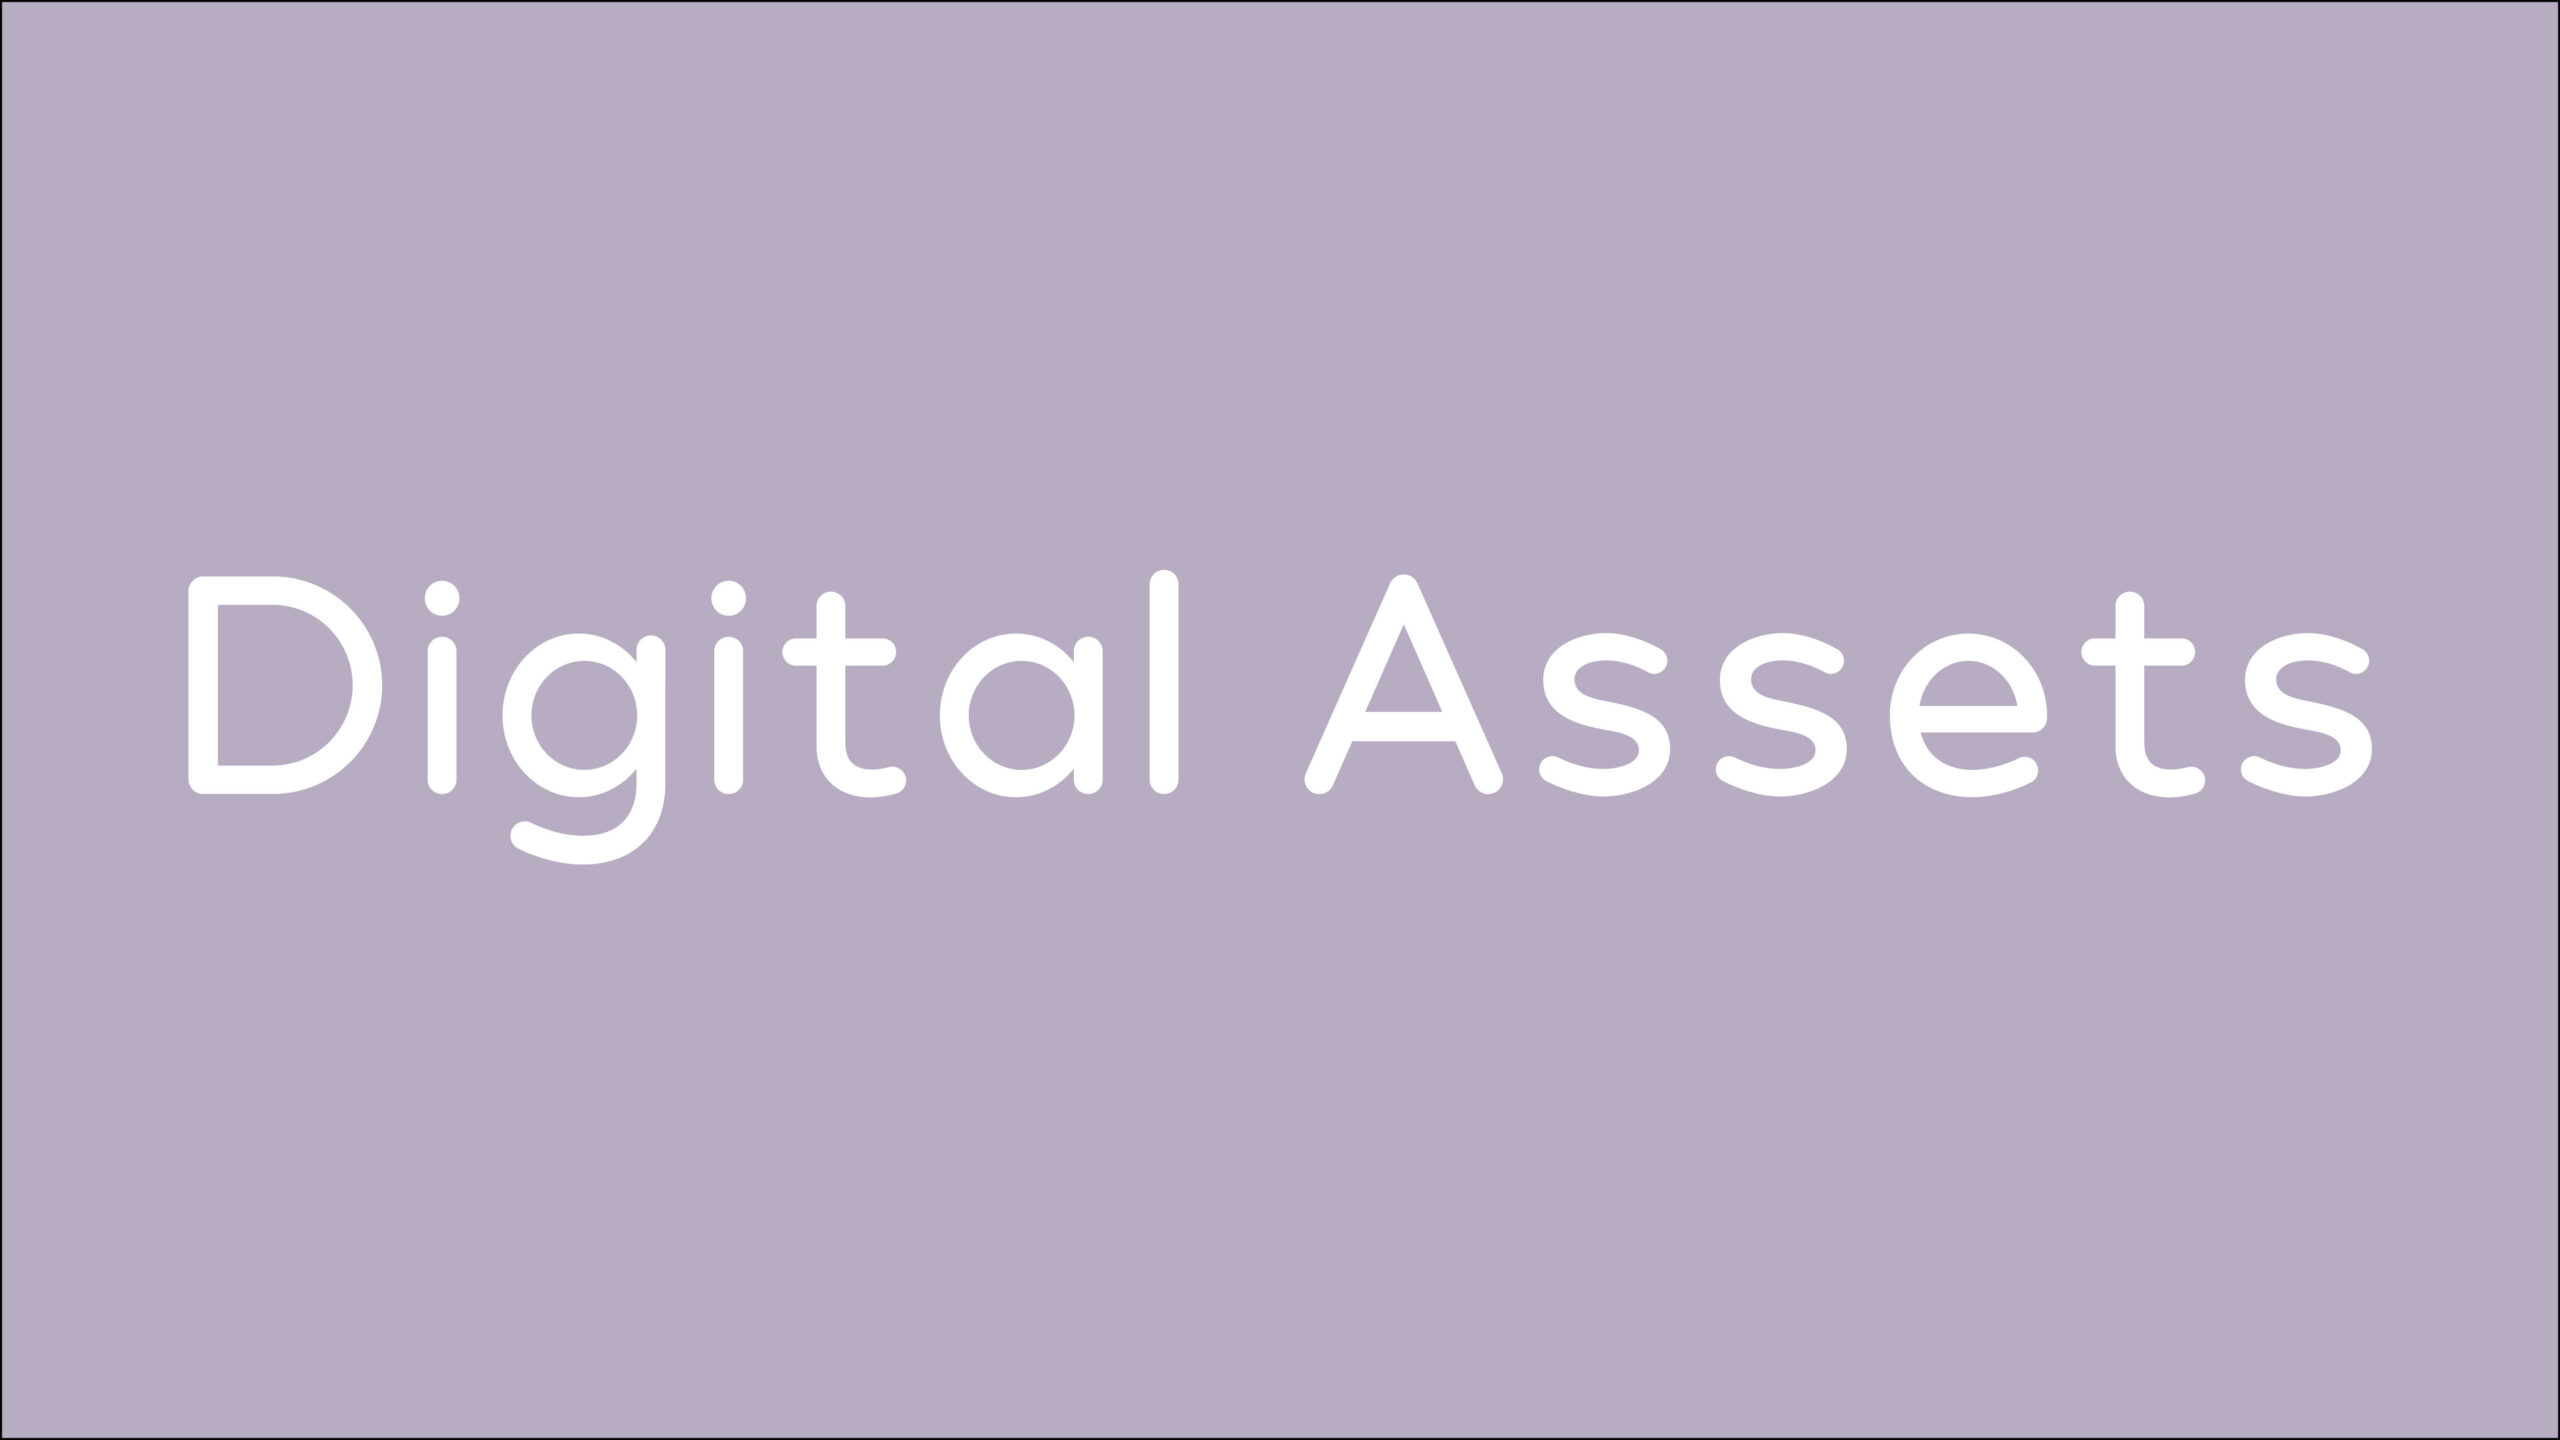 Digital Assets Welcome Kit Graphic